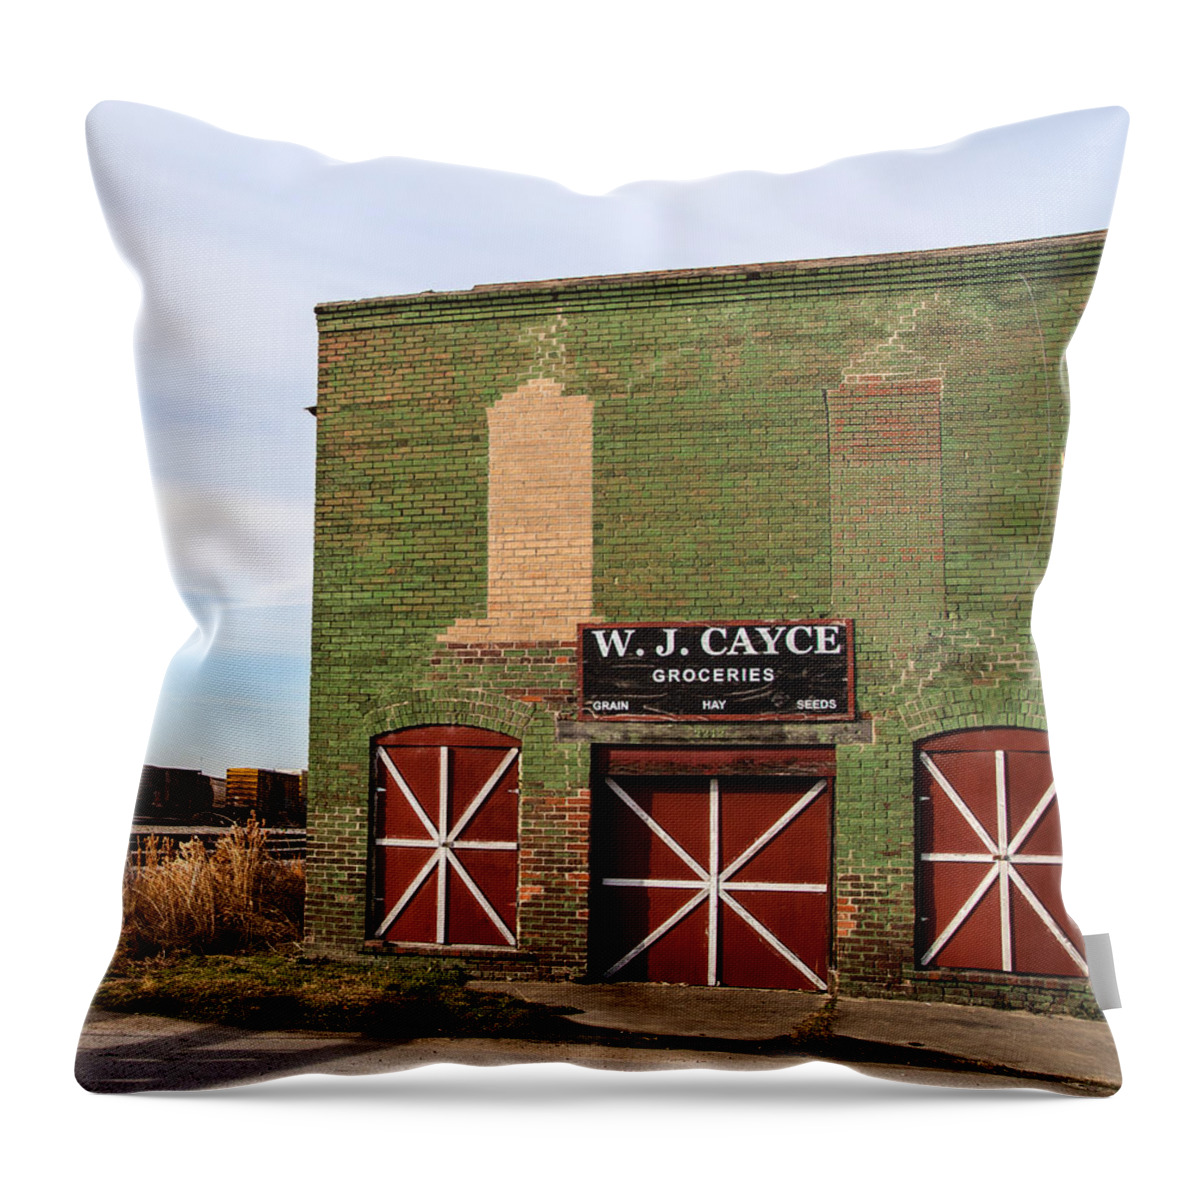 Old Throw Pillow featuring the photograph W. J. Cayce Store by Charles Hite